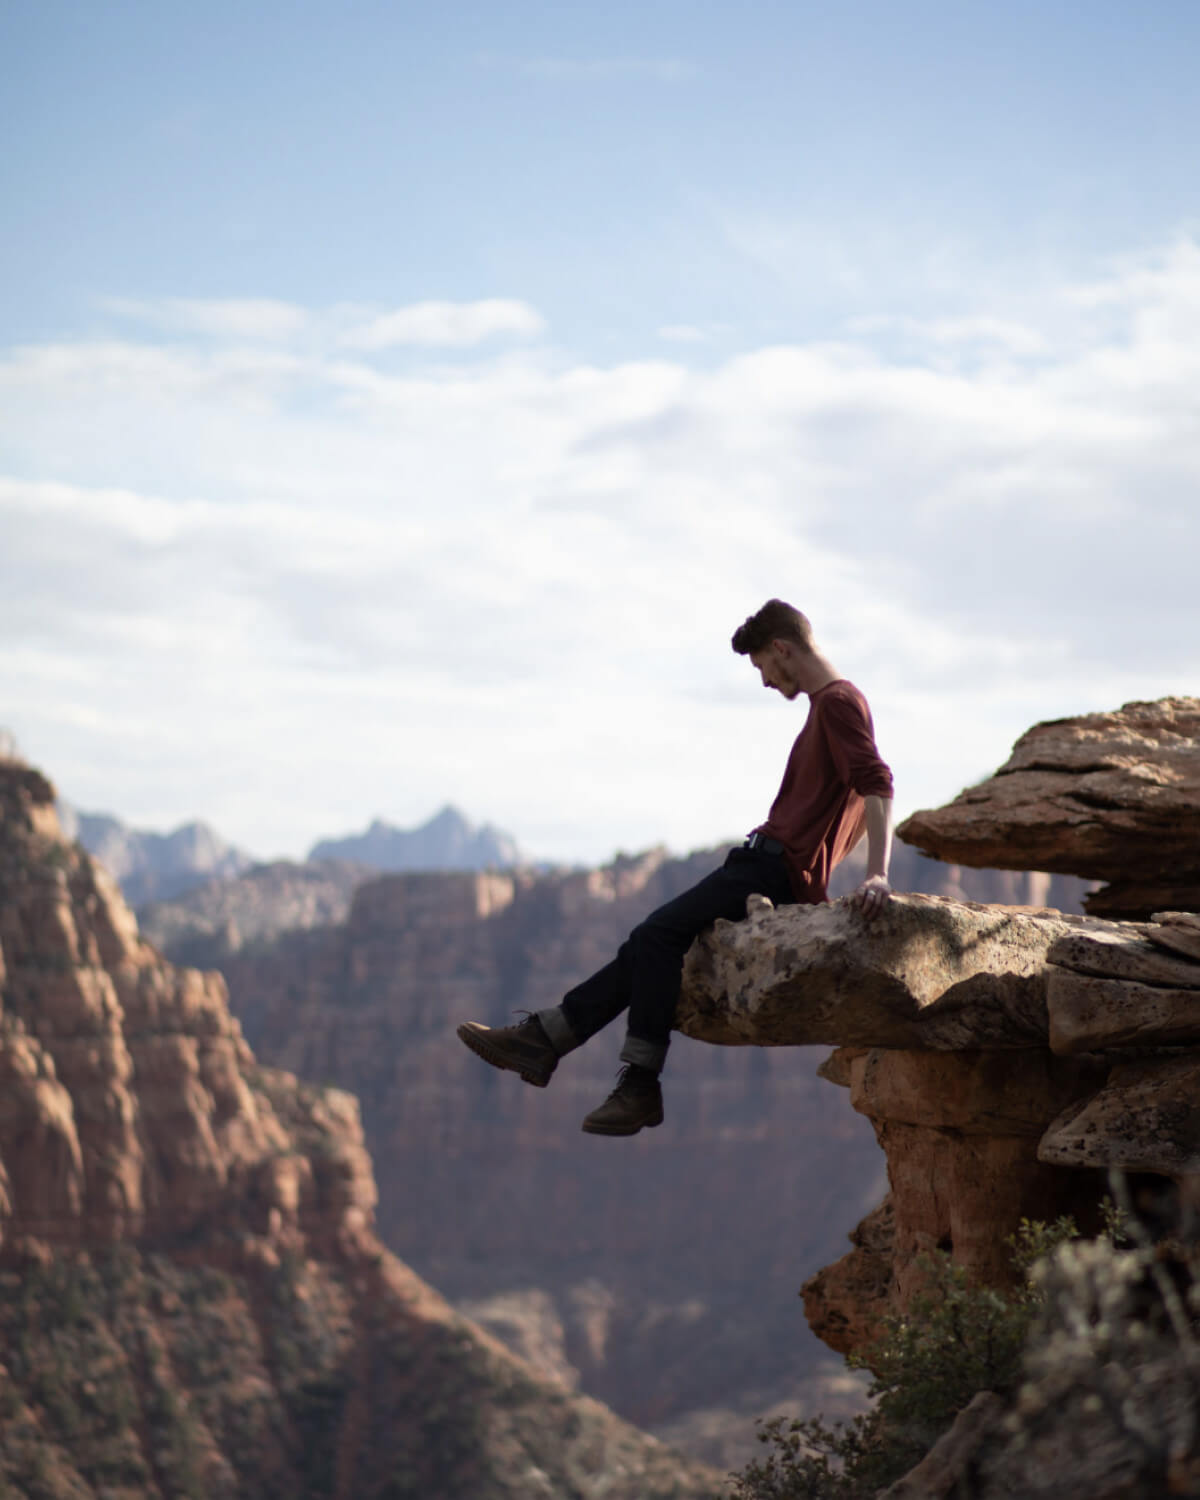 A man sitting on the edge of a rock in his alpaca baselayer